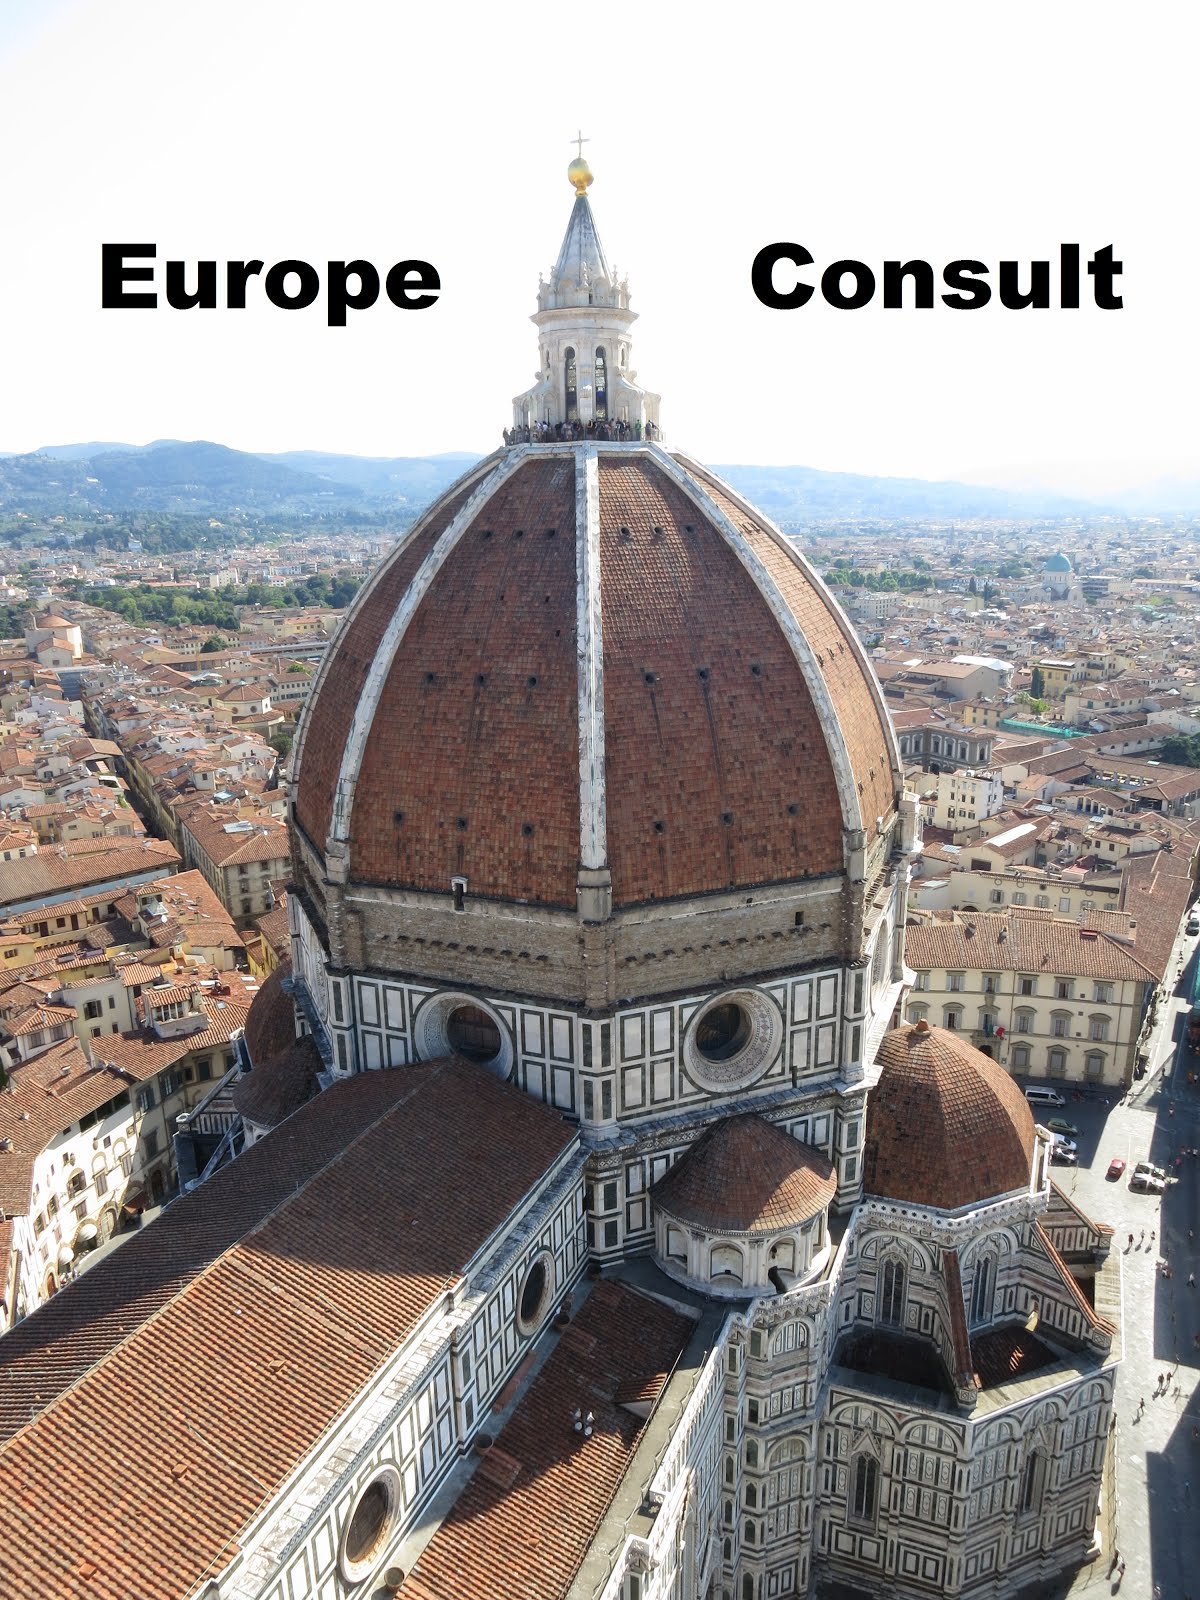 New Travel Blog: Europe Consult - How much does it cost to go to Europe?